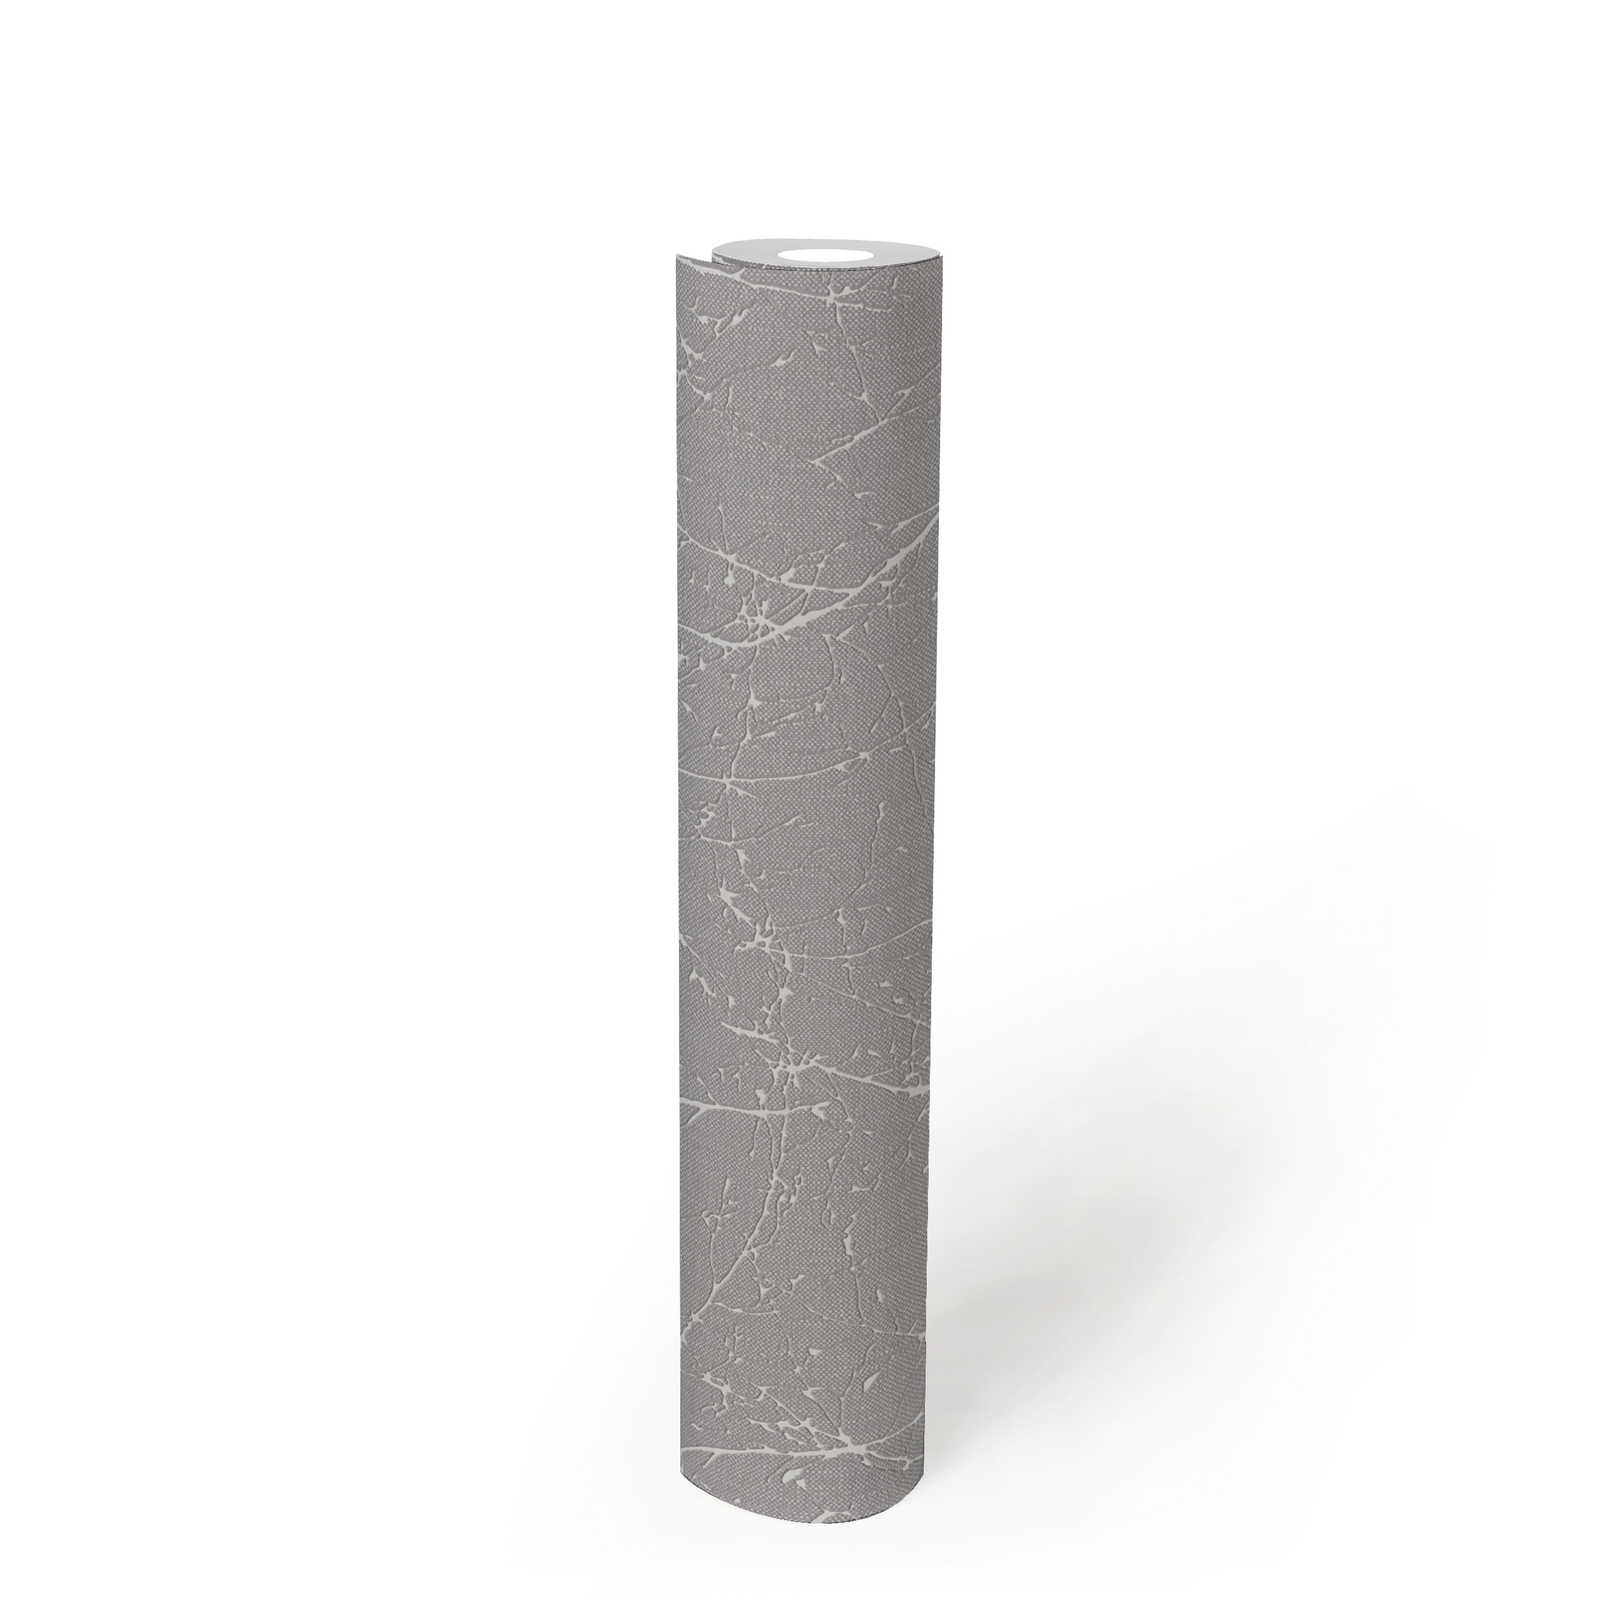             Floral non-woven wallpaper with branch pattern - grey, white
        